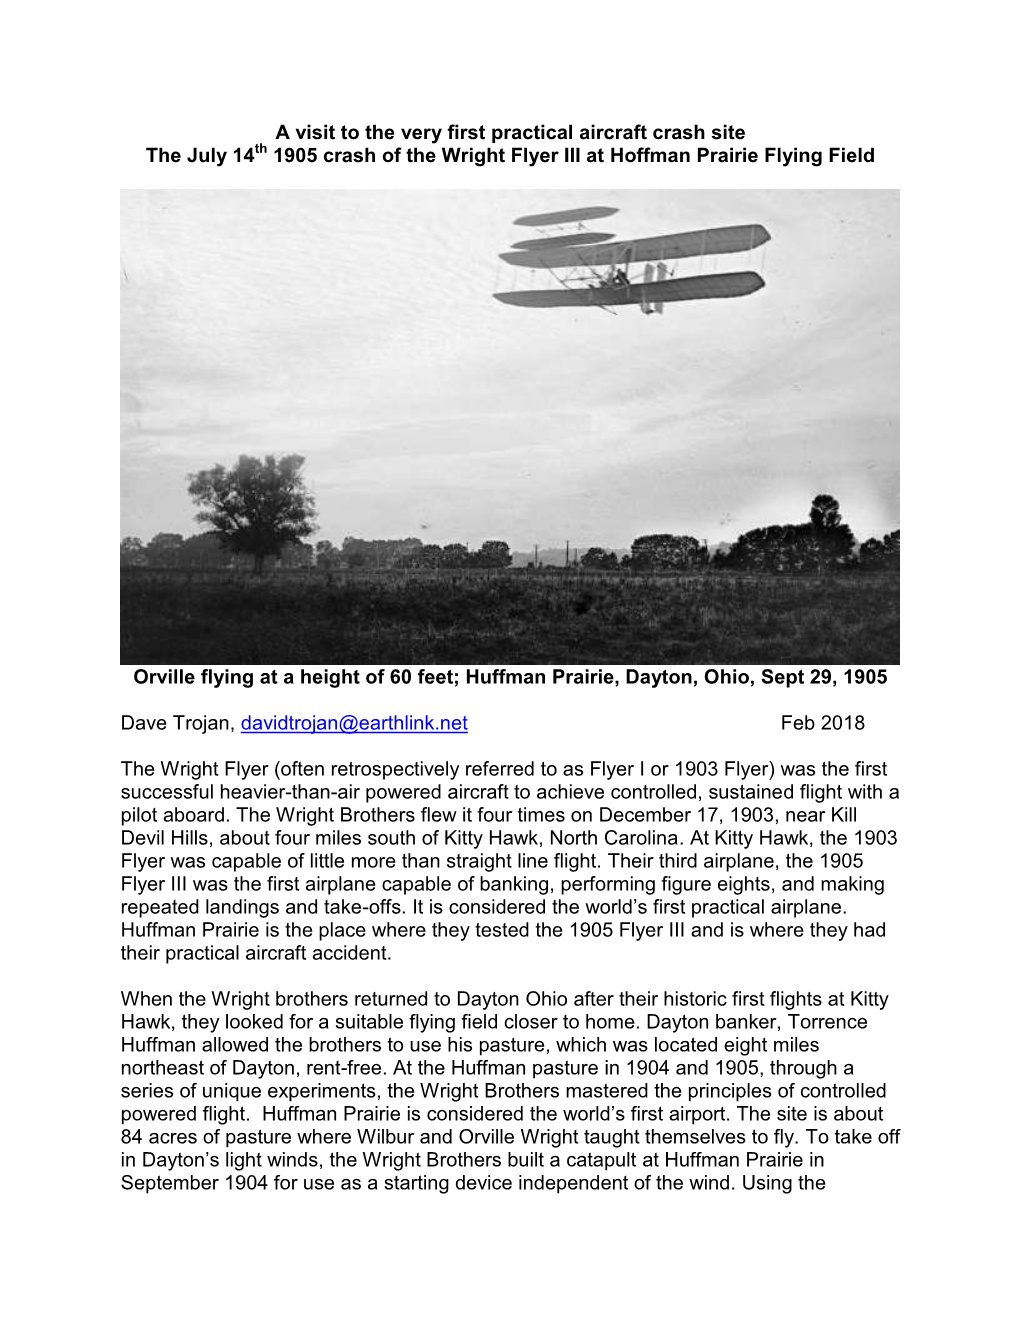 A Visit to the Very First Practical Aircraft Crash Site the July 14 1905 Crash of the Wright Flyer III at Hoffman Prairie Flying